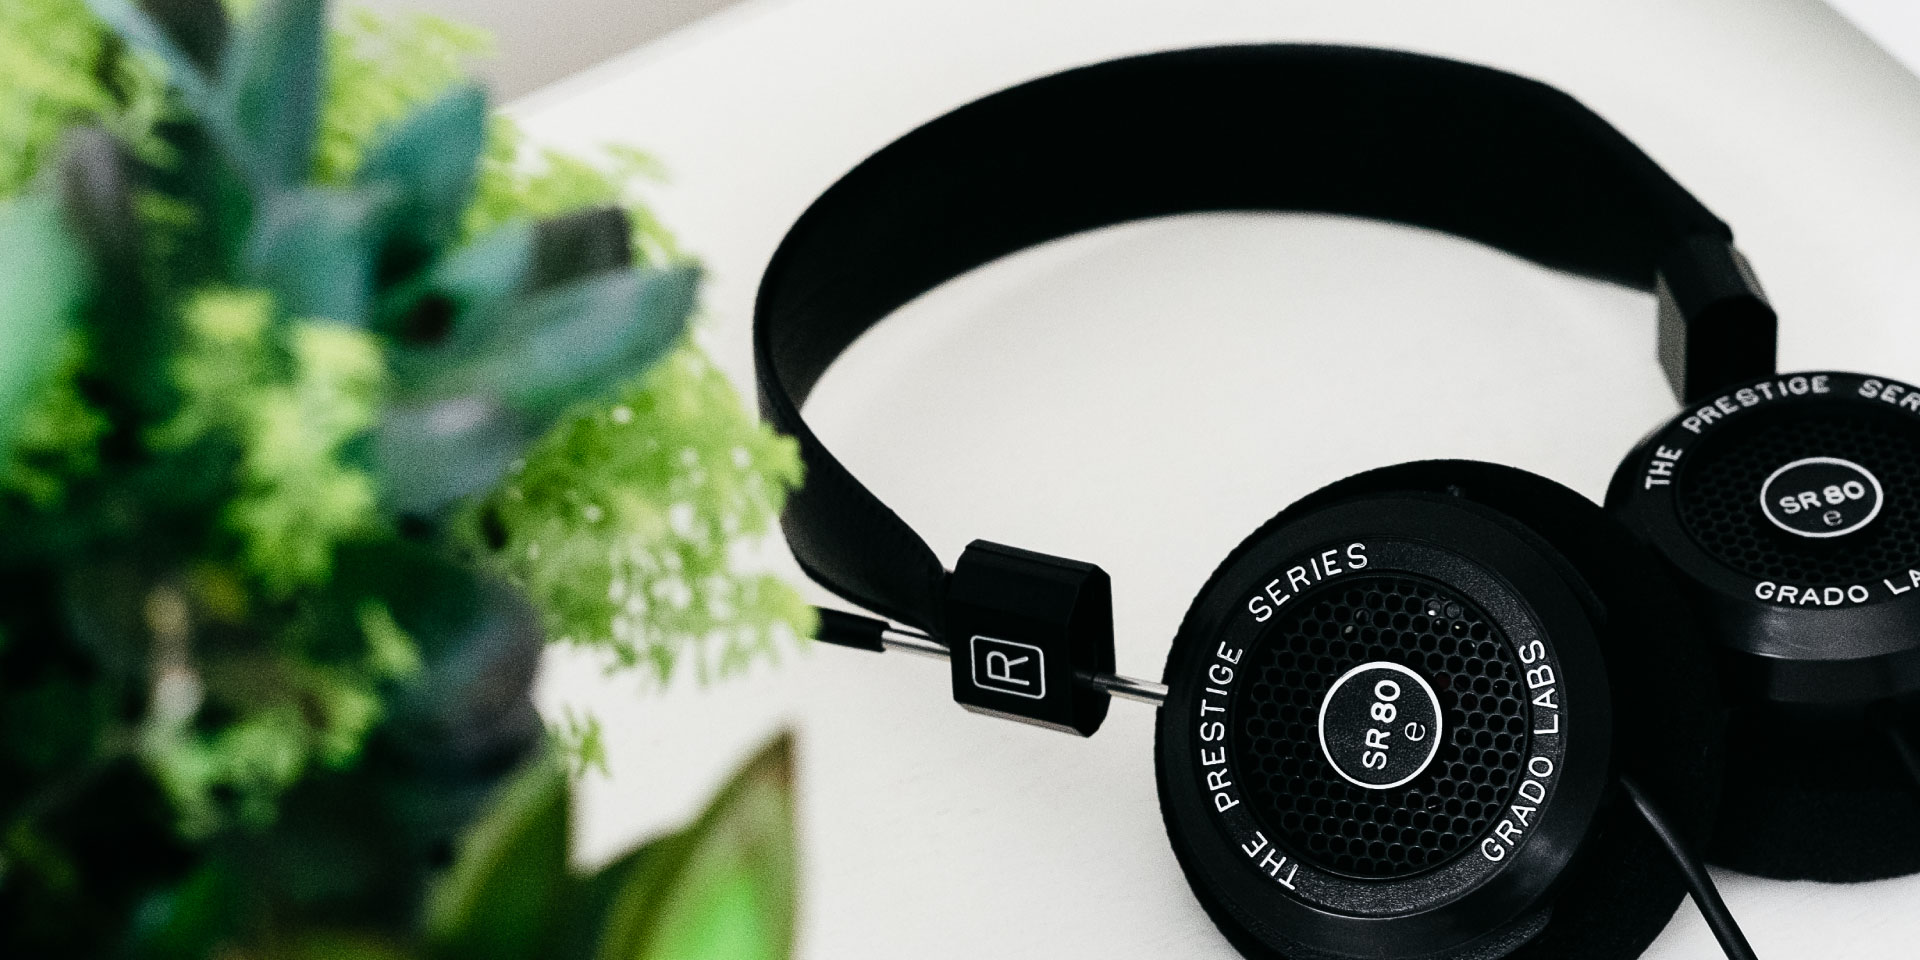 Grado SR80e headphones product lifestyle image from Grado. Headphones are on a white table with a plant in the left side of the frame.